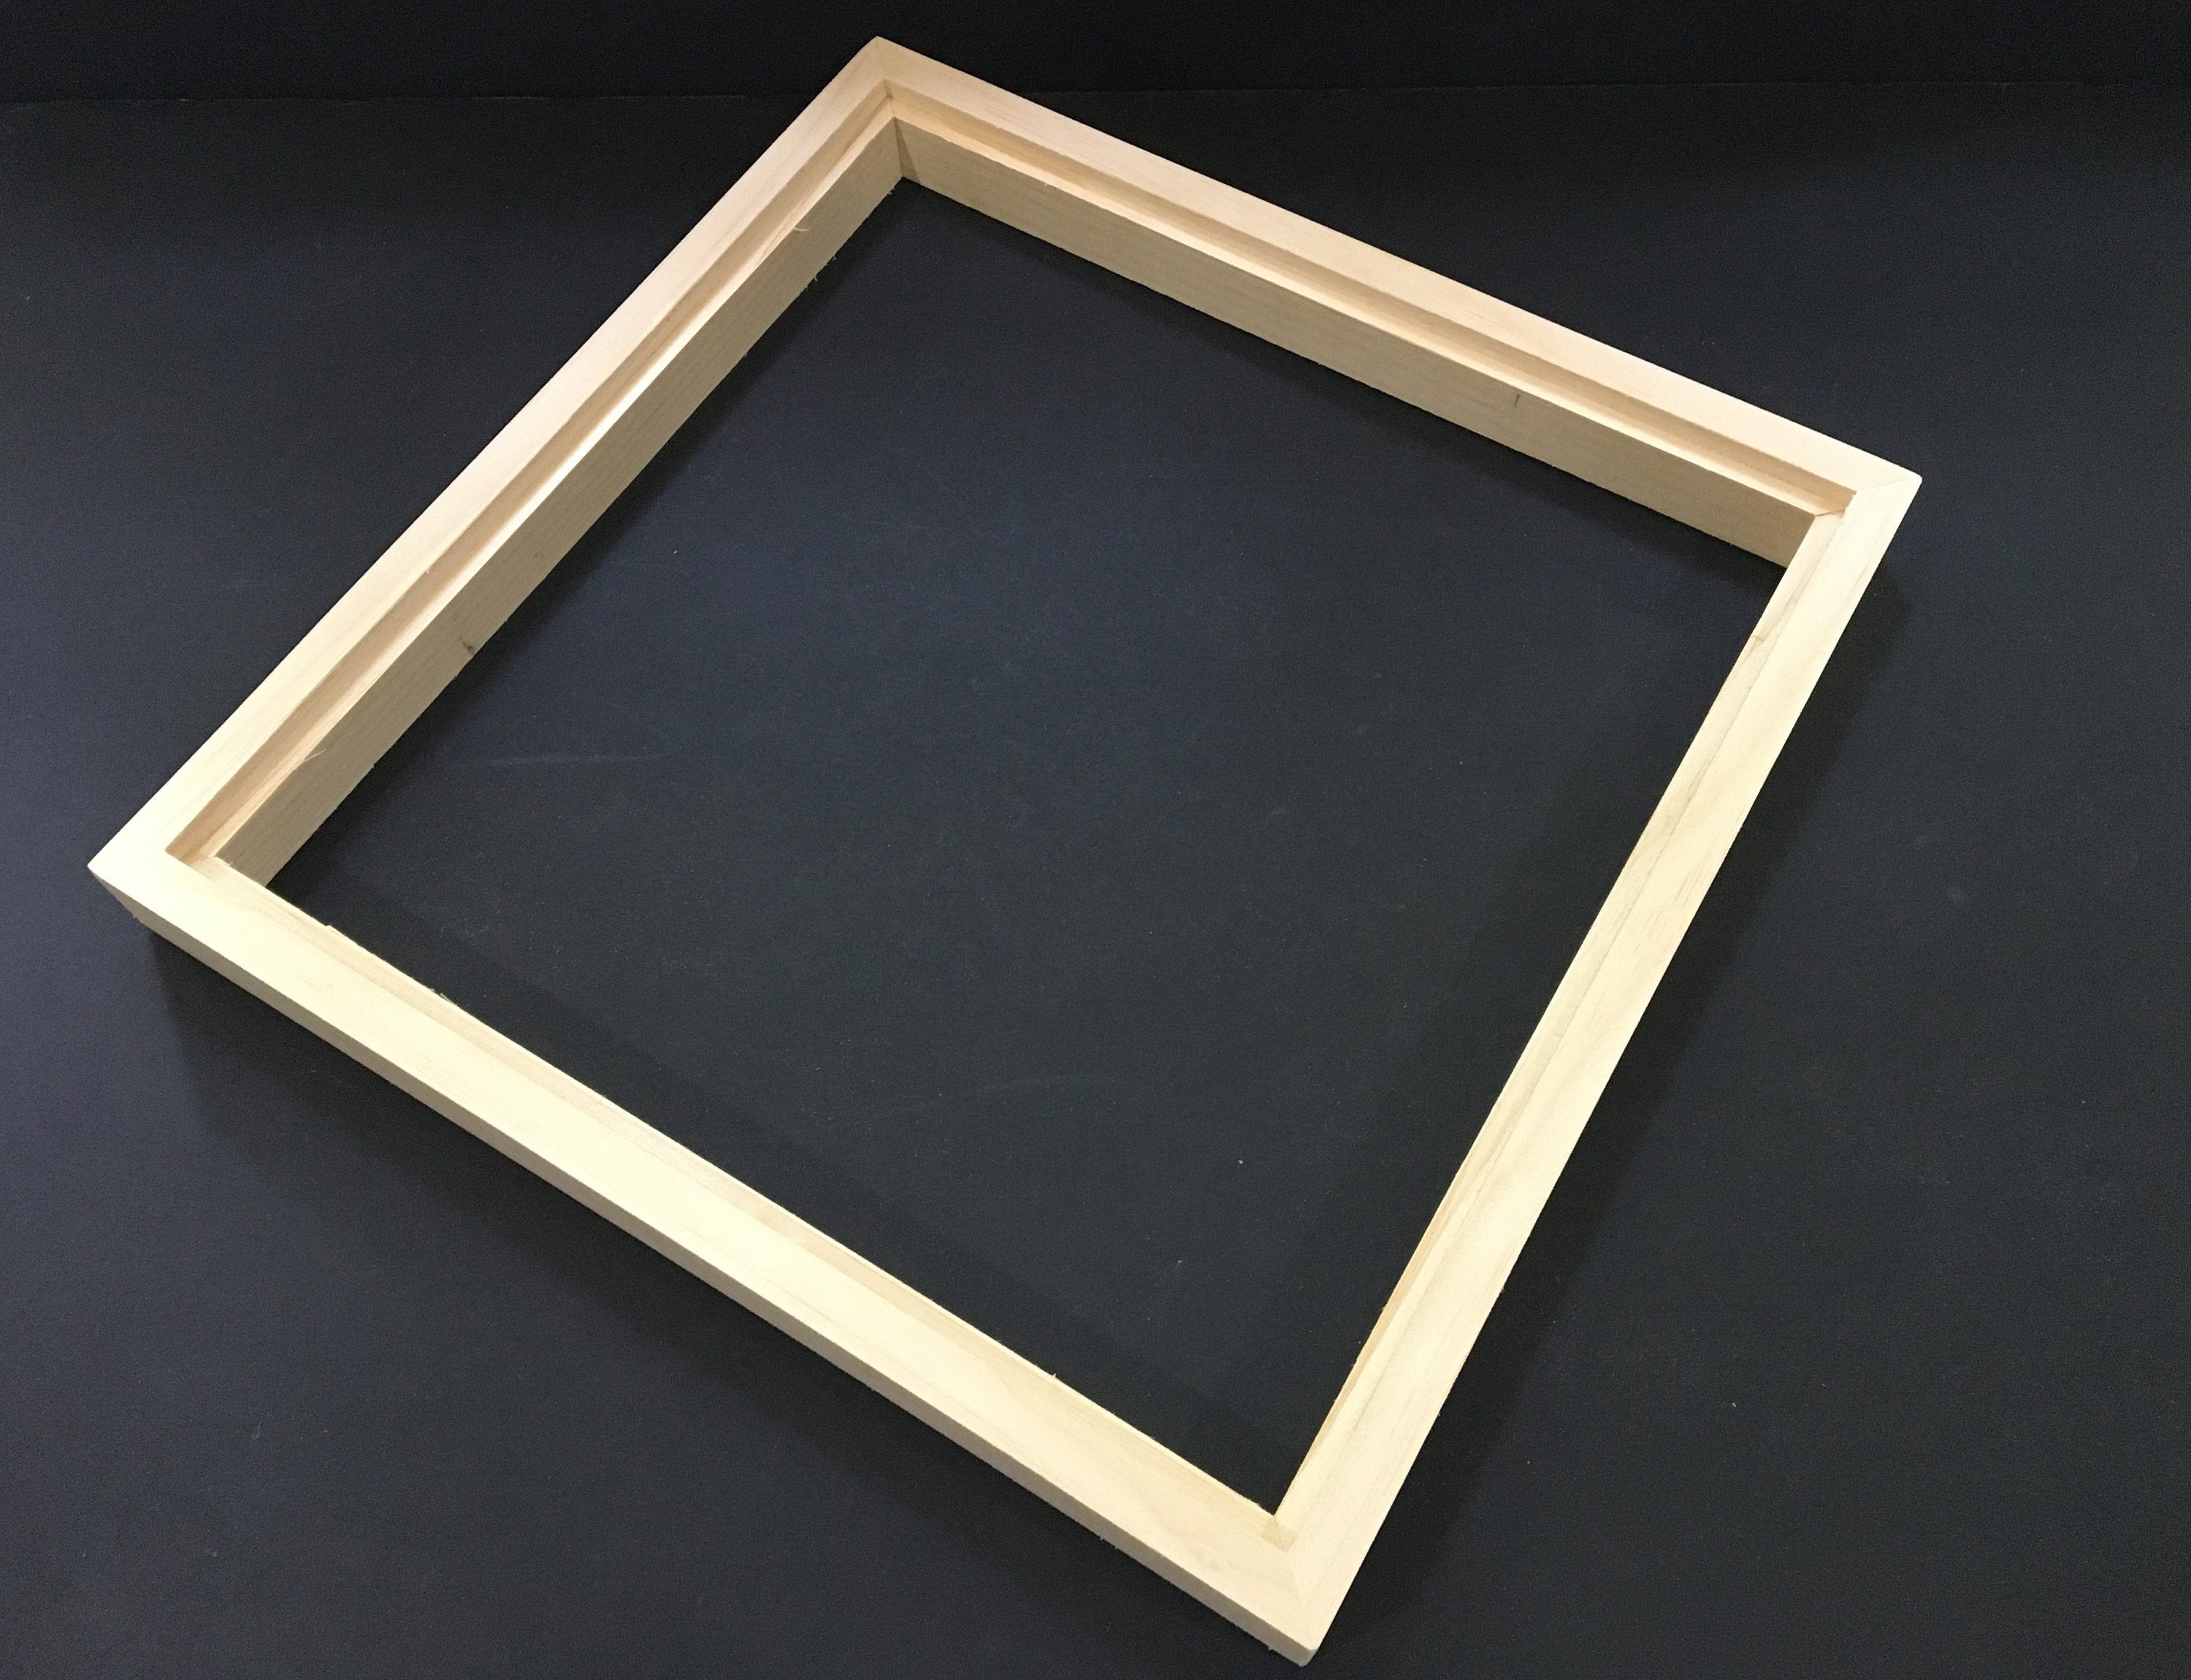 Illusions Floater Frame, 12x12 Black - 1-1/2 Deep